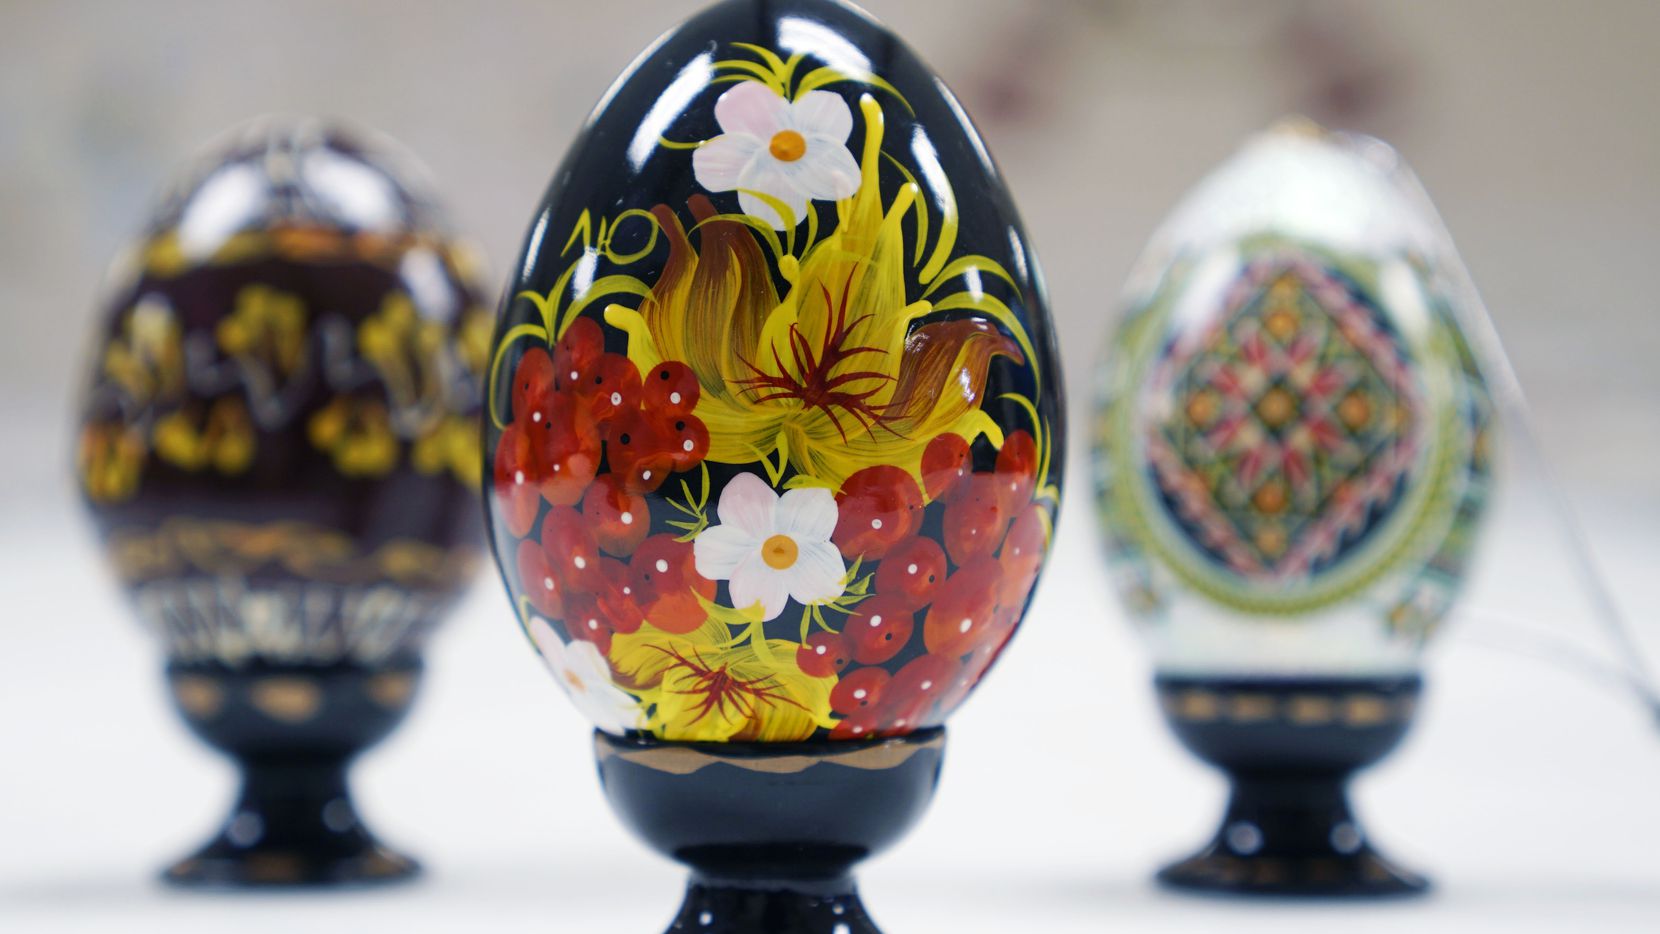 Pysanky, traditional Ukrainian Easter eggs, were on display and for sell during Palm Sunday...